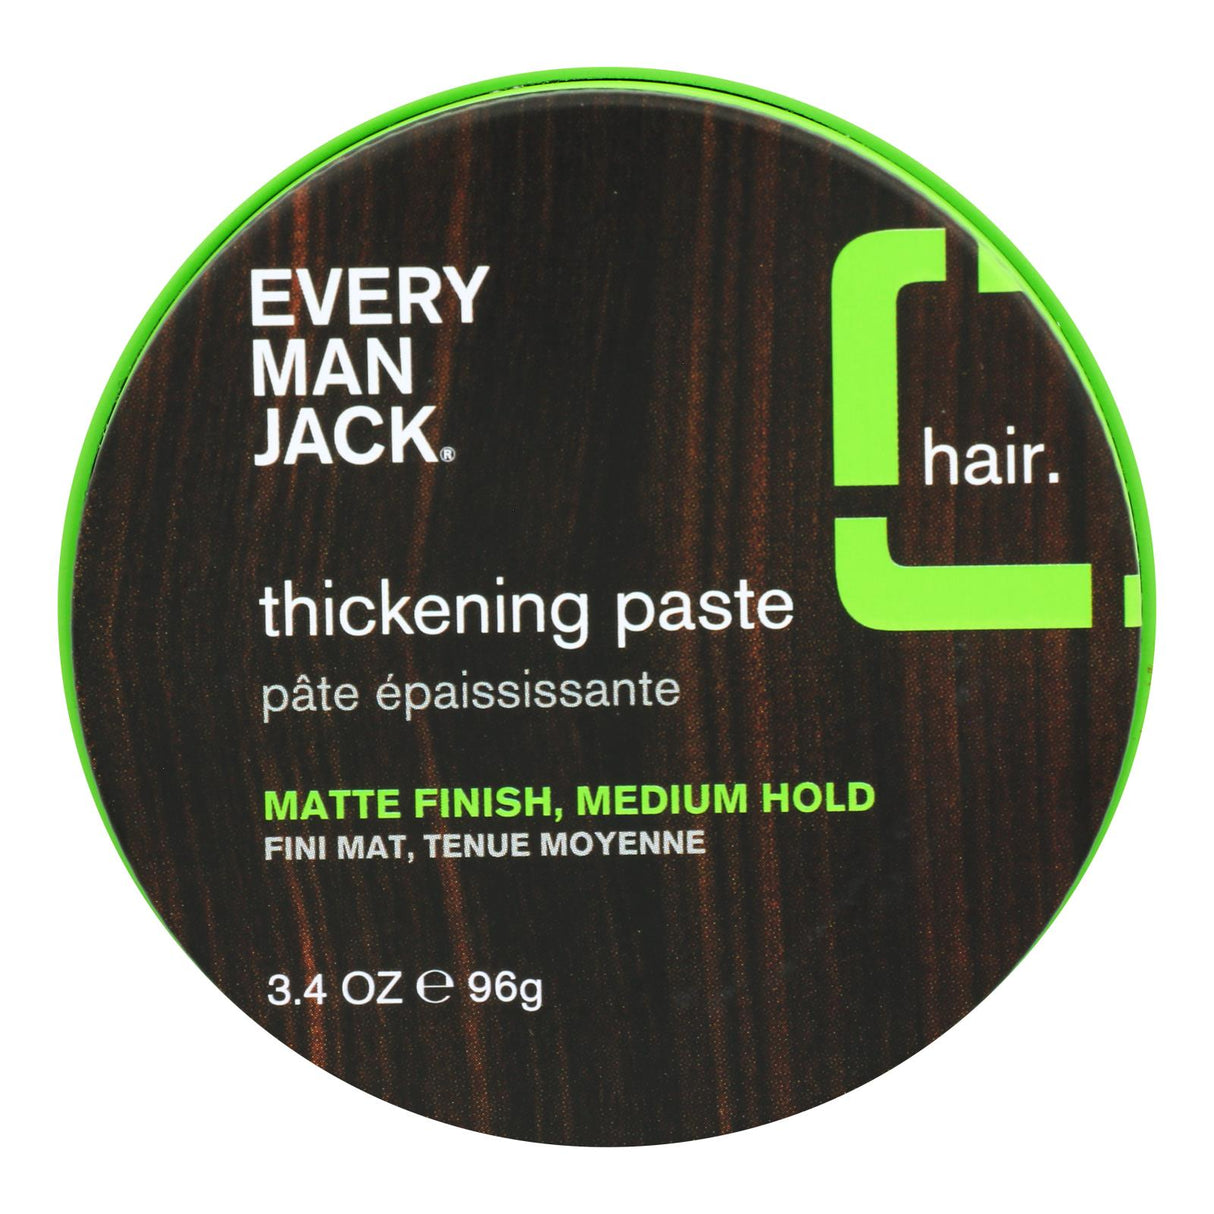 Every Man Jack Thickening Paste for Fuller, Textured Hair (3.4 Oz.) - Cozy Farm 